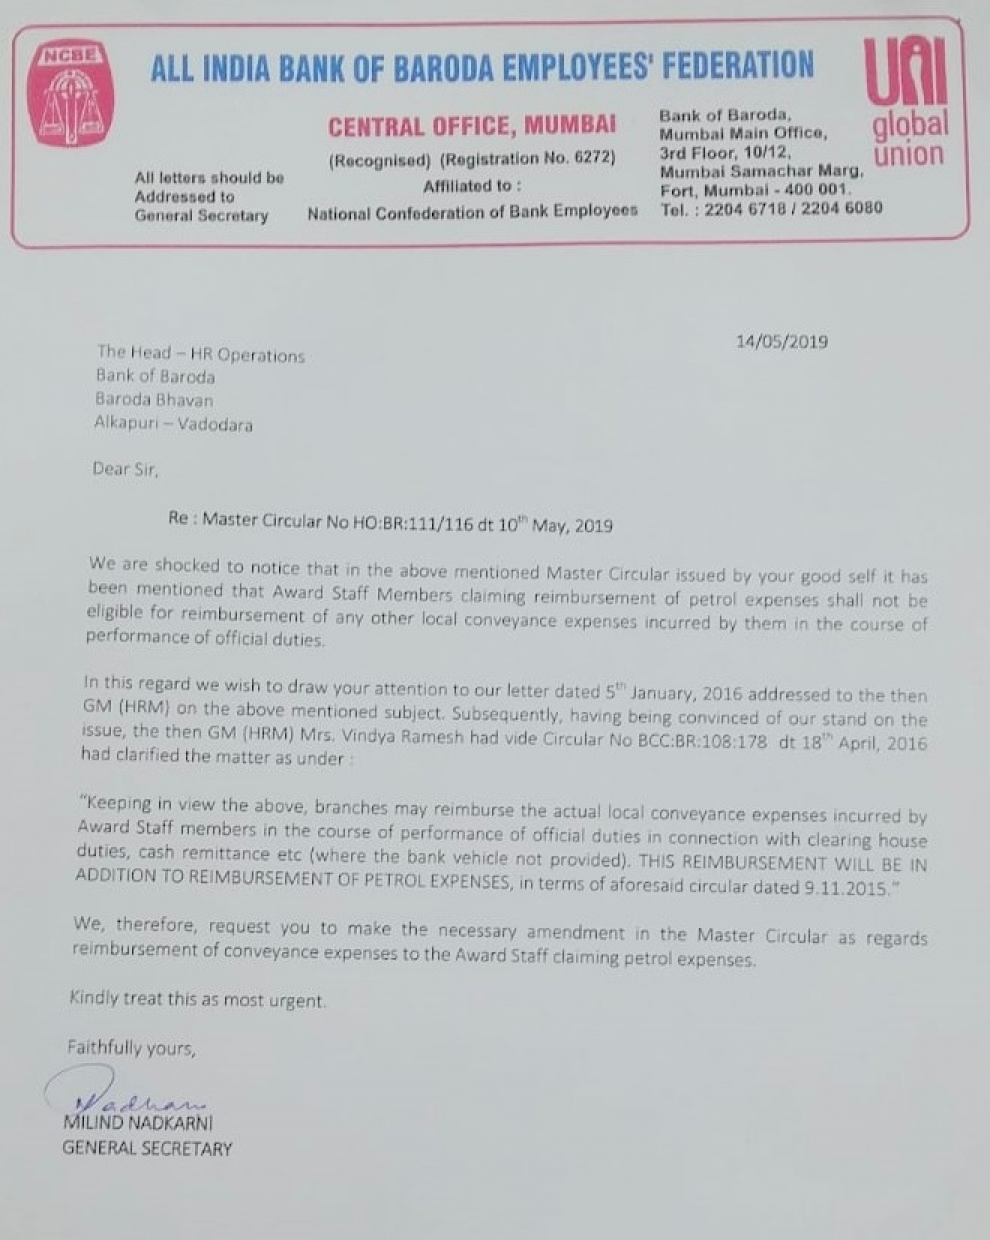 Letter to Head - HR Operations for Conveyance Expense to Staff